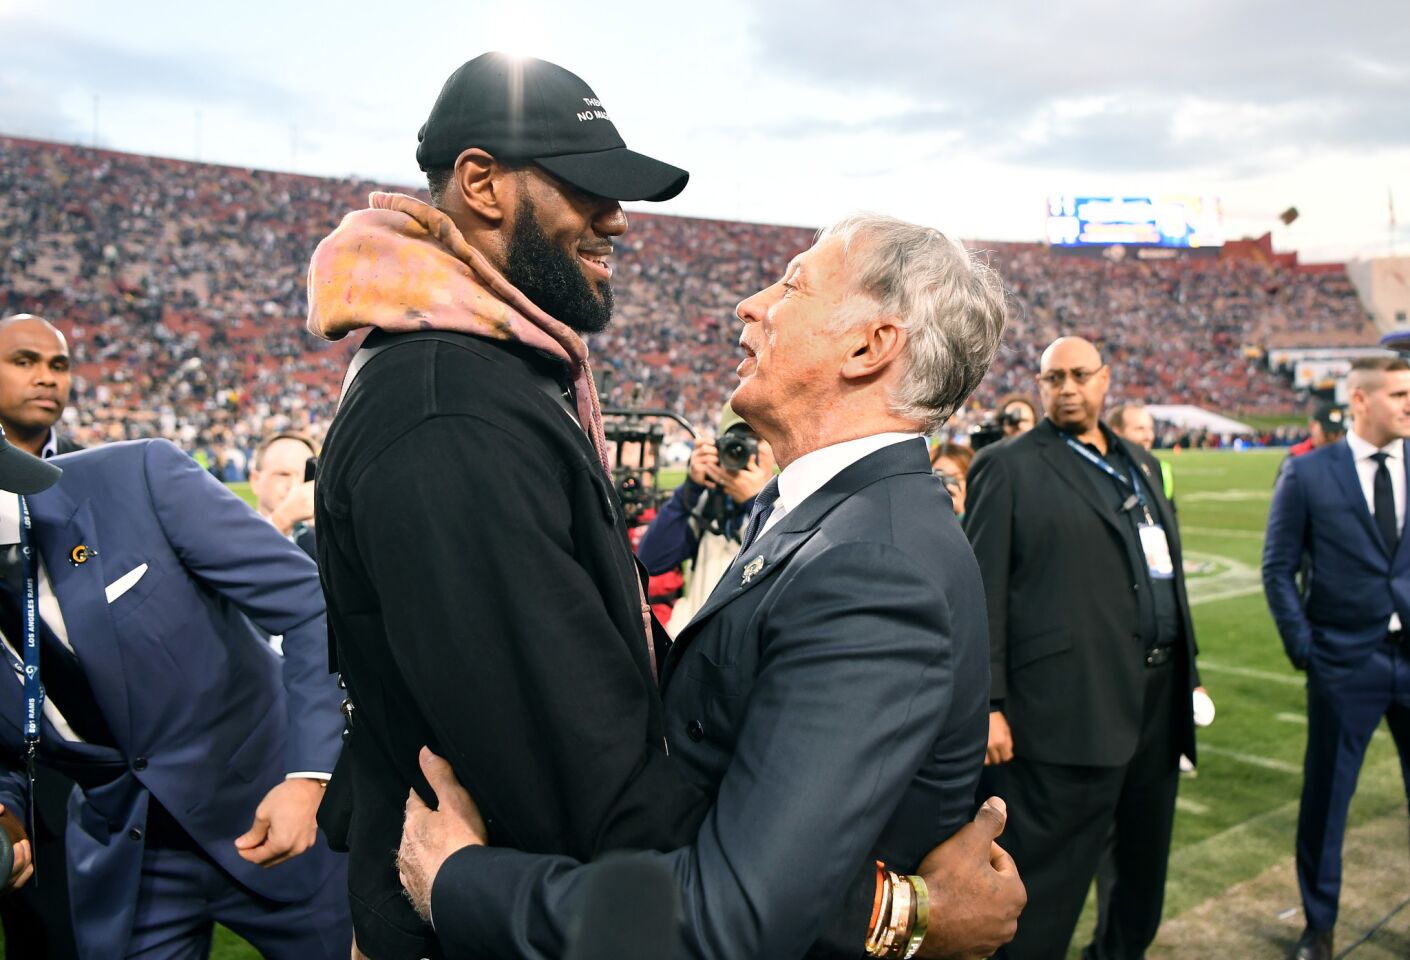 Lakers star LeBron James, left, and Rams owner Stan Kroenke greet each other before the game against the Cowboys.